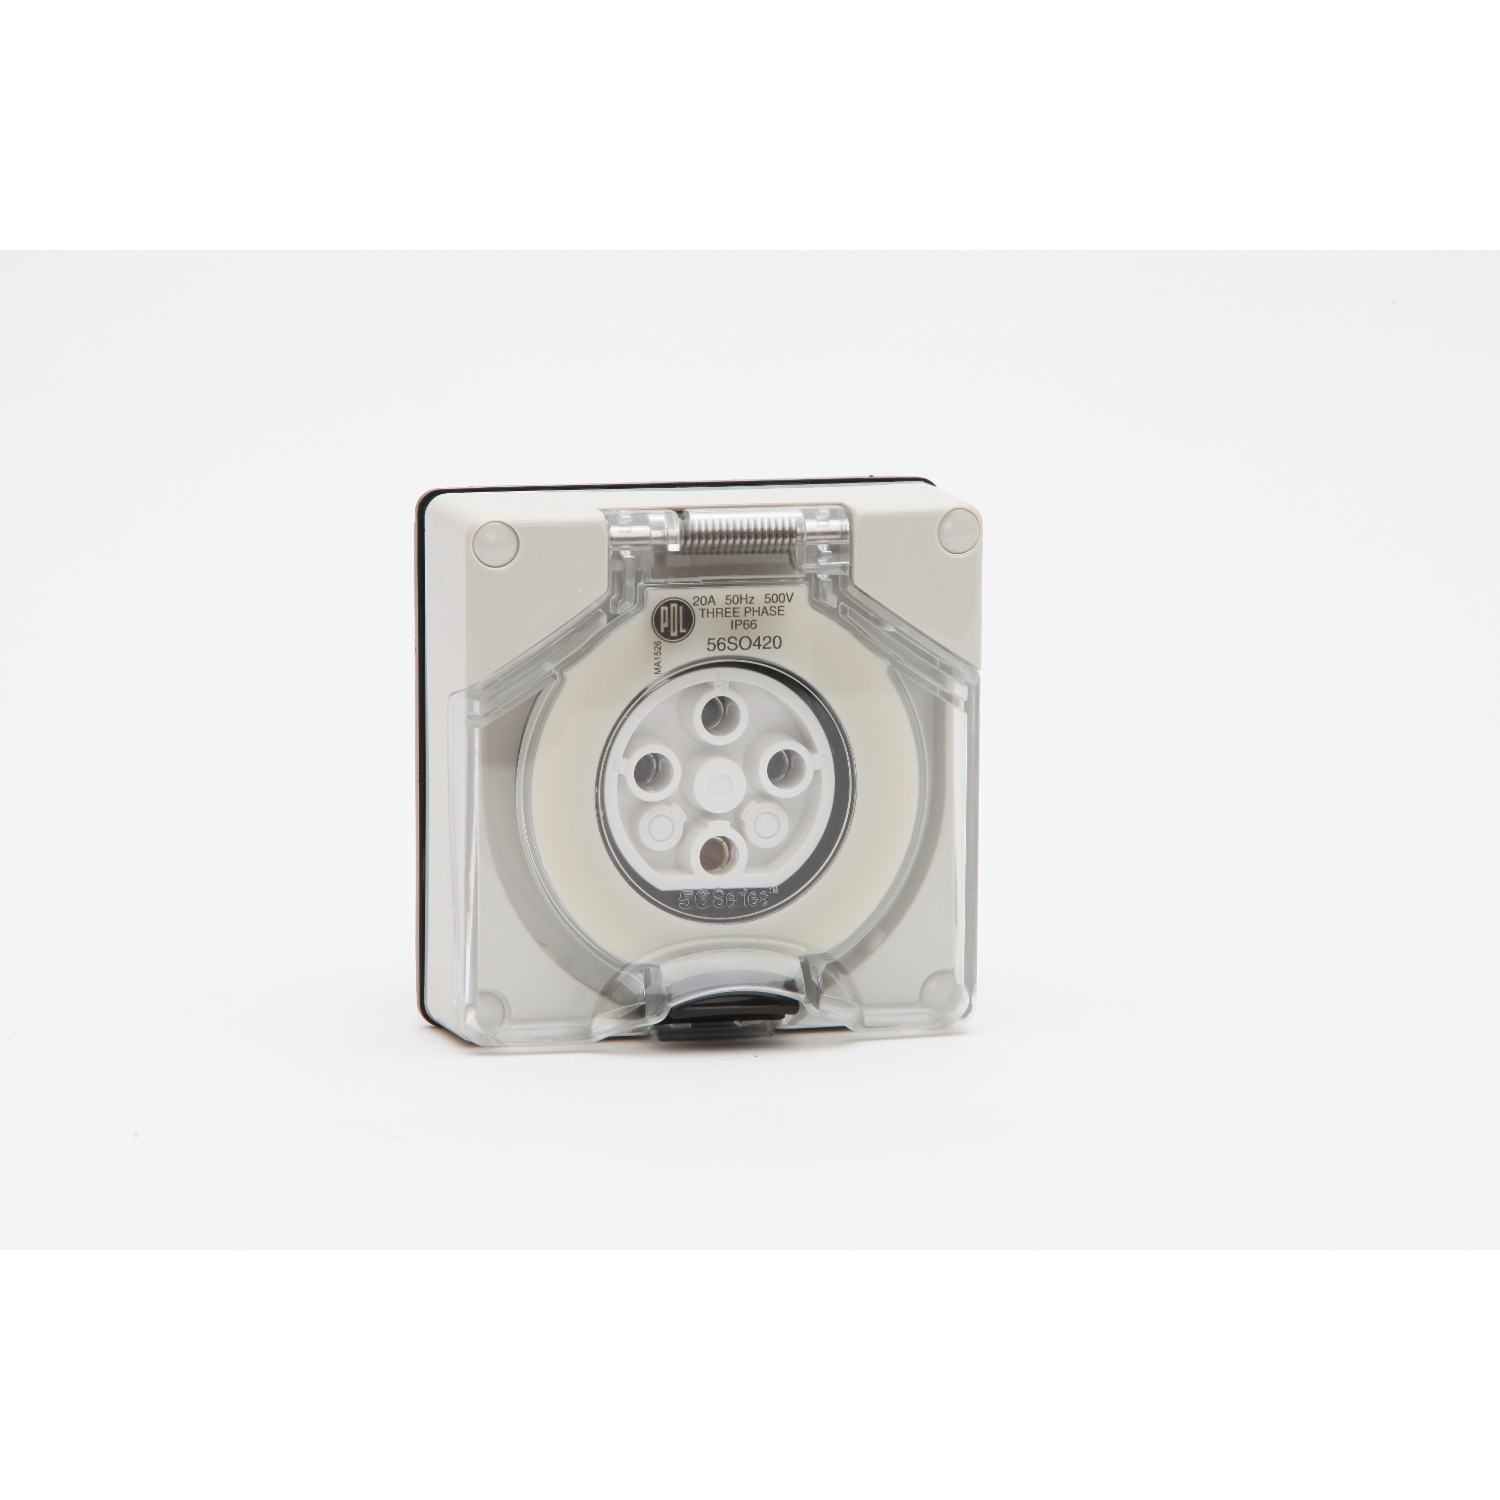 PDL 56 Series - Socket 16A 500V 3-Phase 4-Round Pin IP66 - Chemical-Resistant White